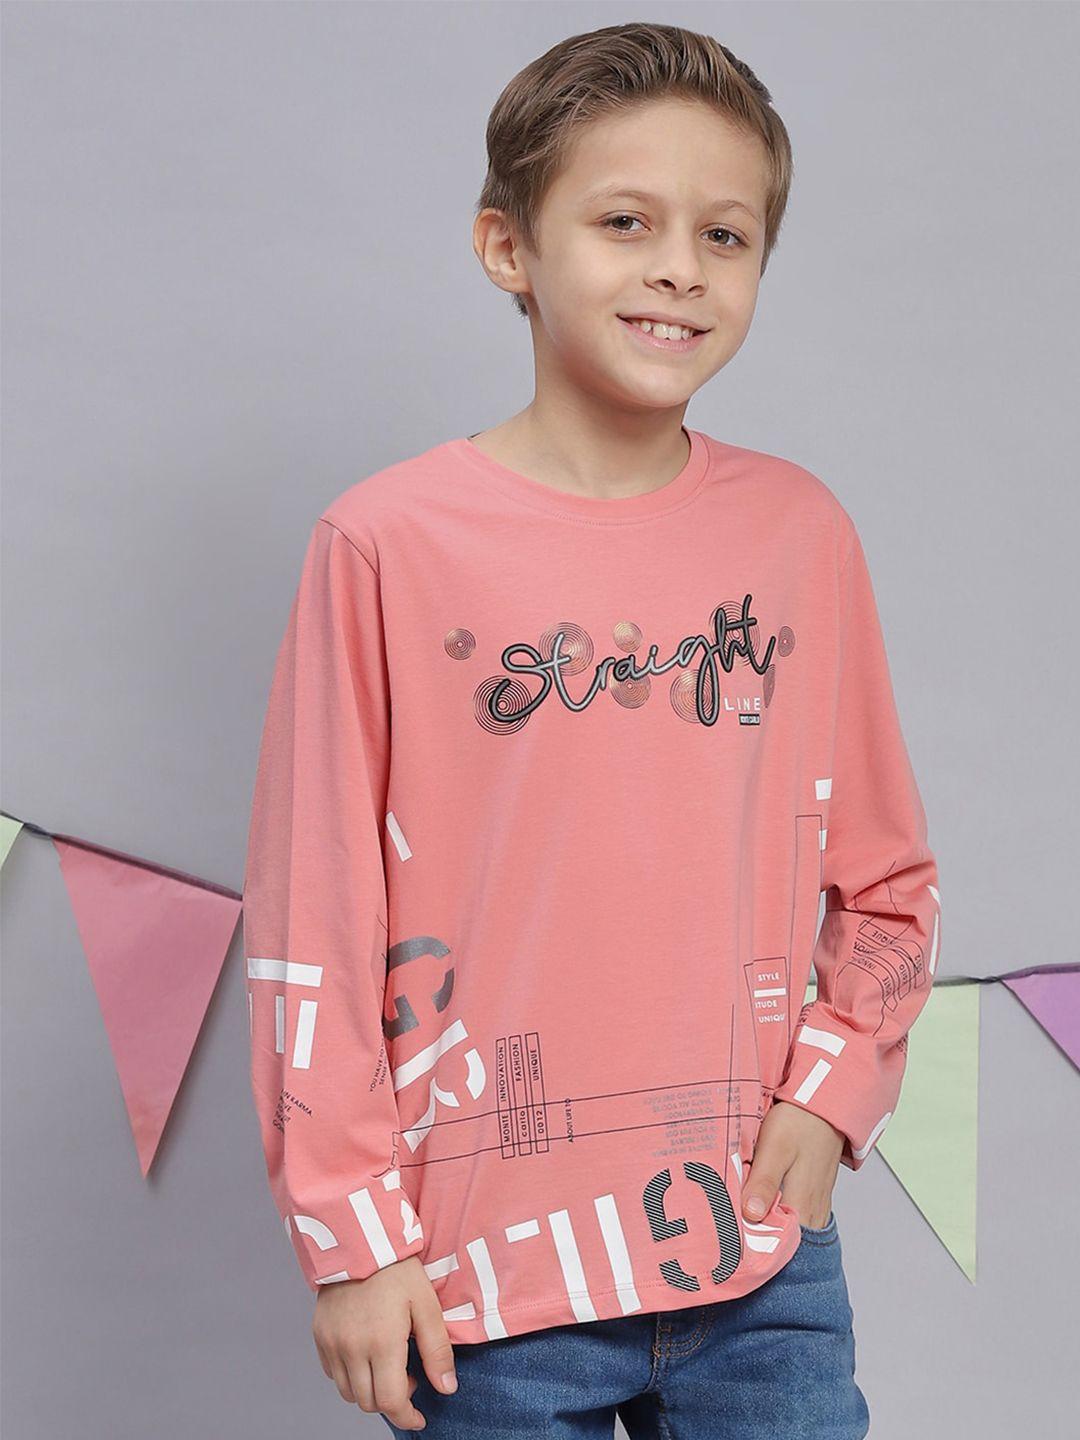 monte carlo boys typography printed long sleeves pure cotton t-shirt